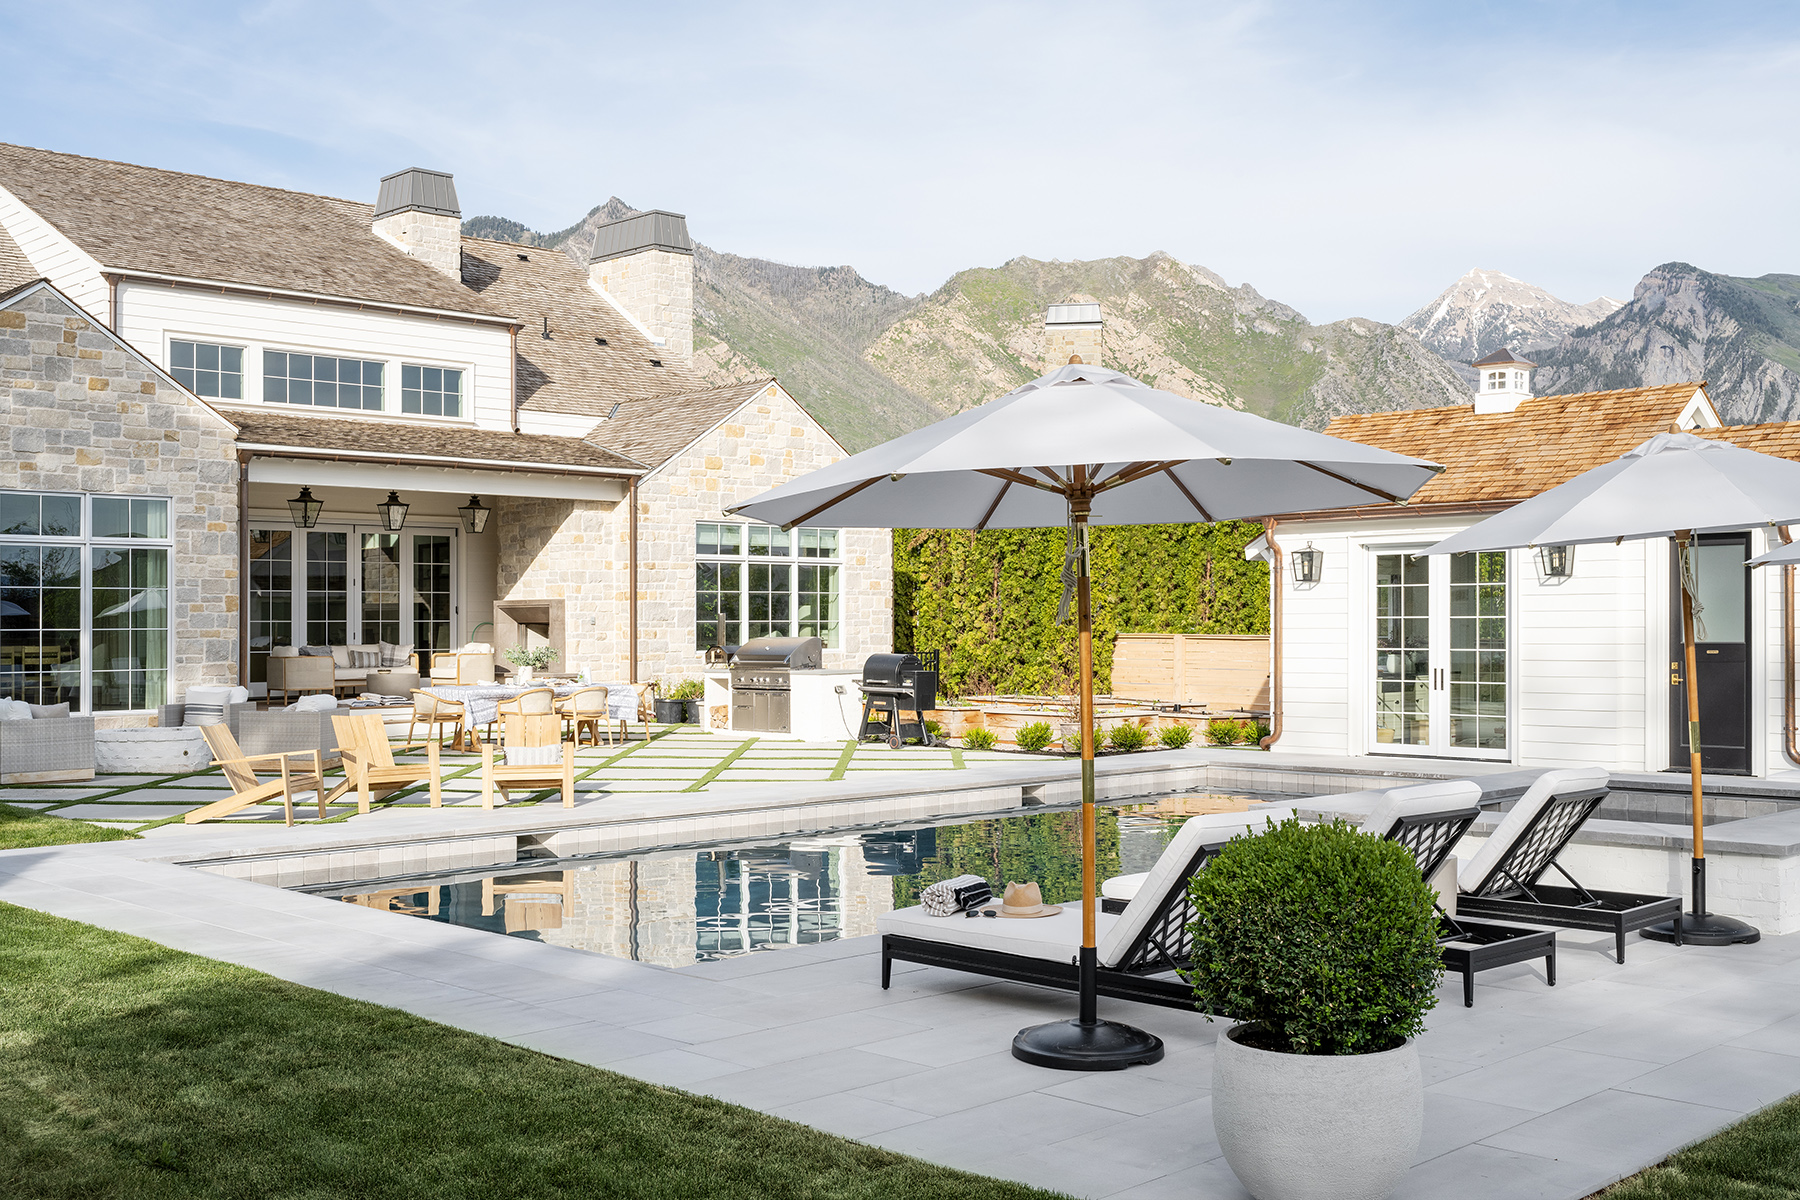 backyard with pool, grill, and outdoor dining area